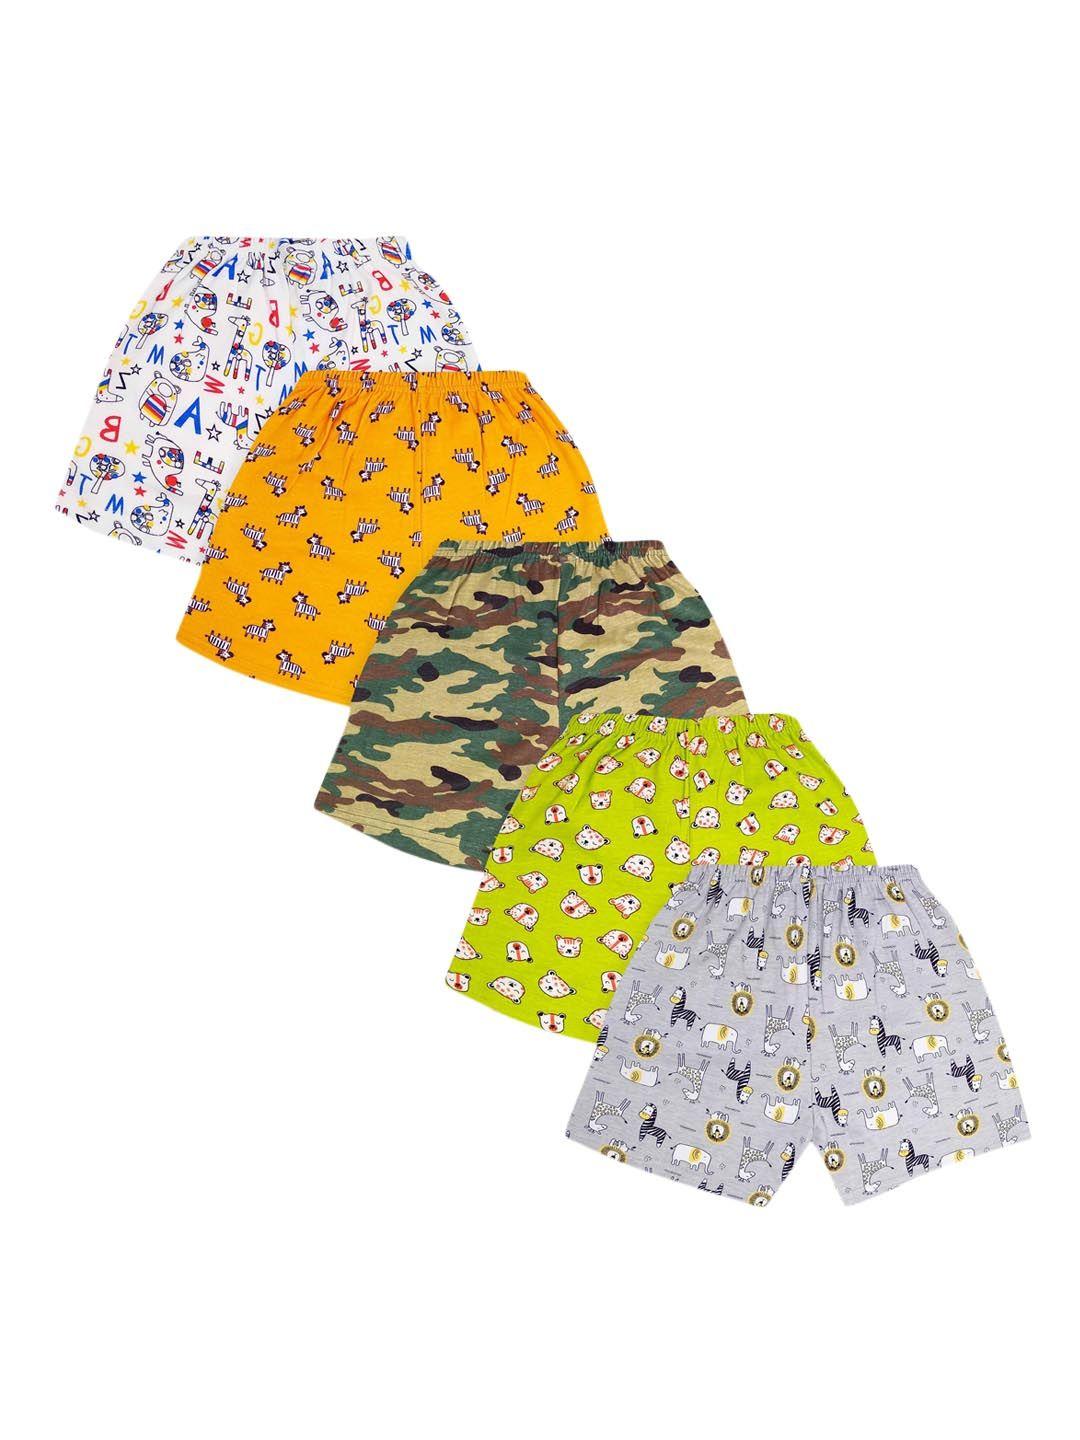 the boo club unisex kids pack of 5 printed regular shorts